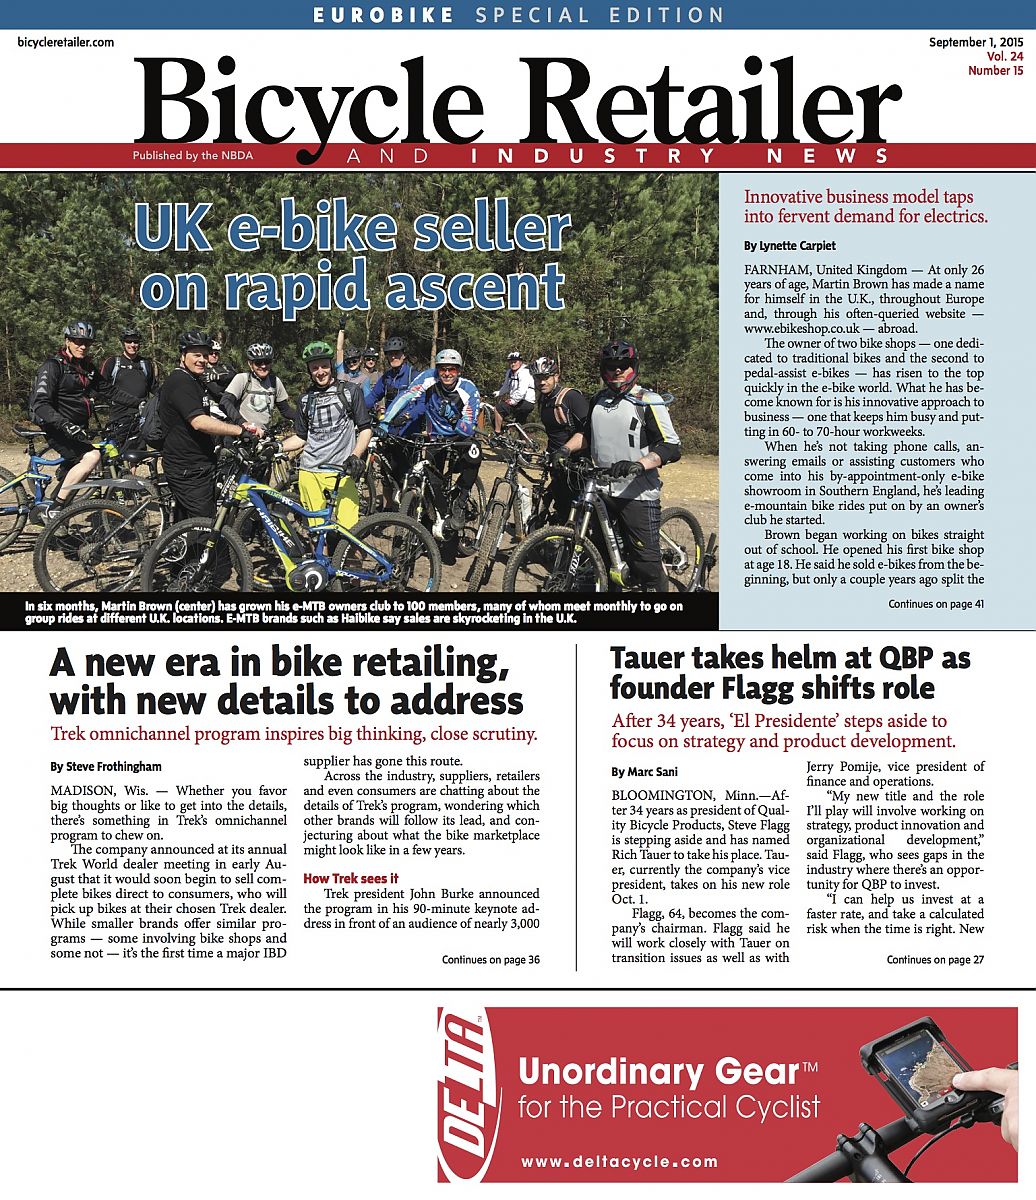 New BRAIN issue looks at Treks online program, changes at QBP and more Bicycle Retailer and Industry News